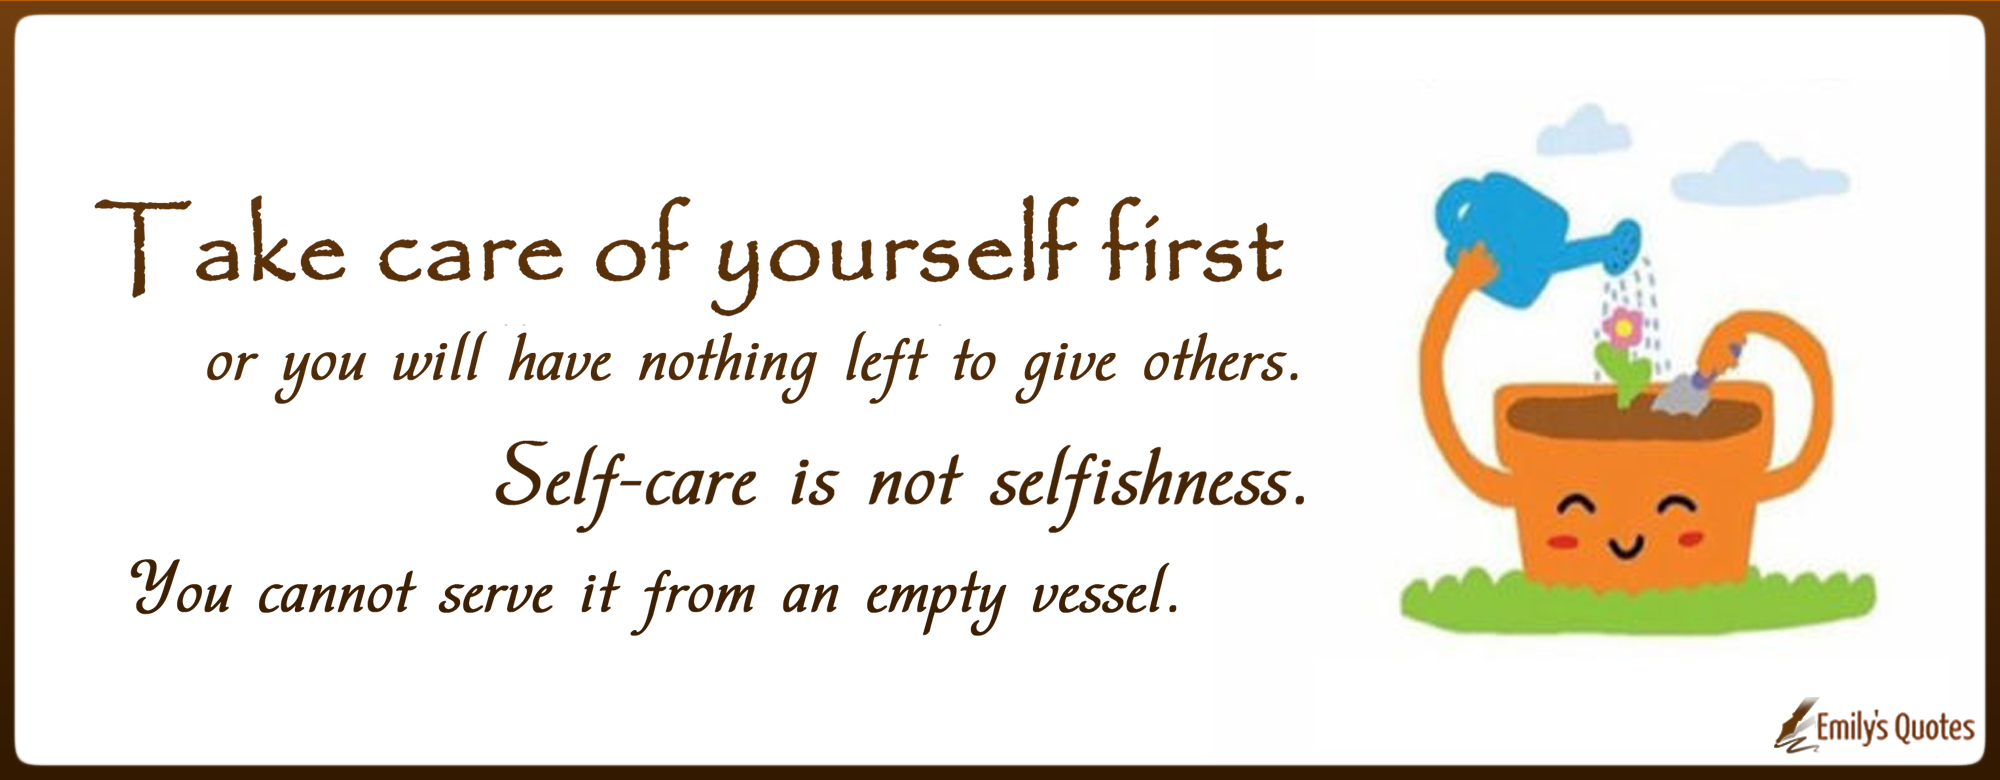 Take care of yourself first or you will have nothing left to give